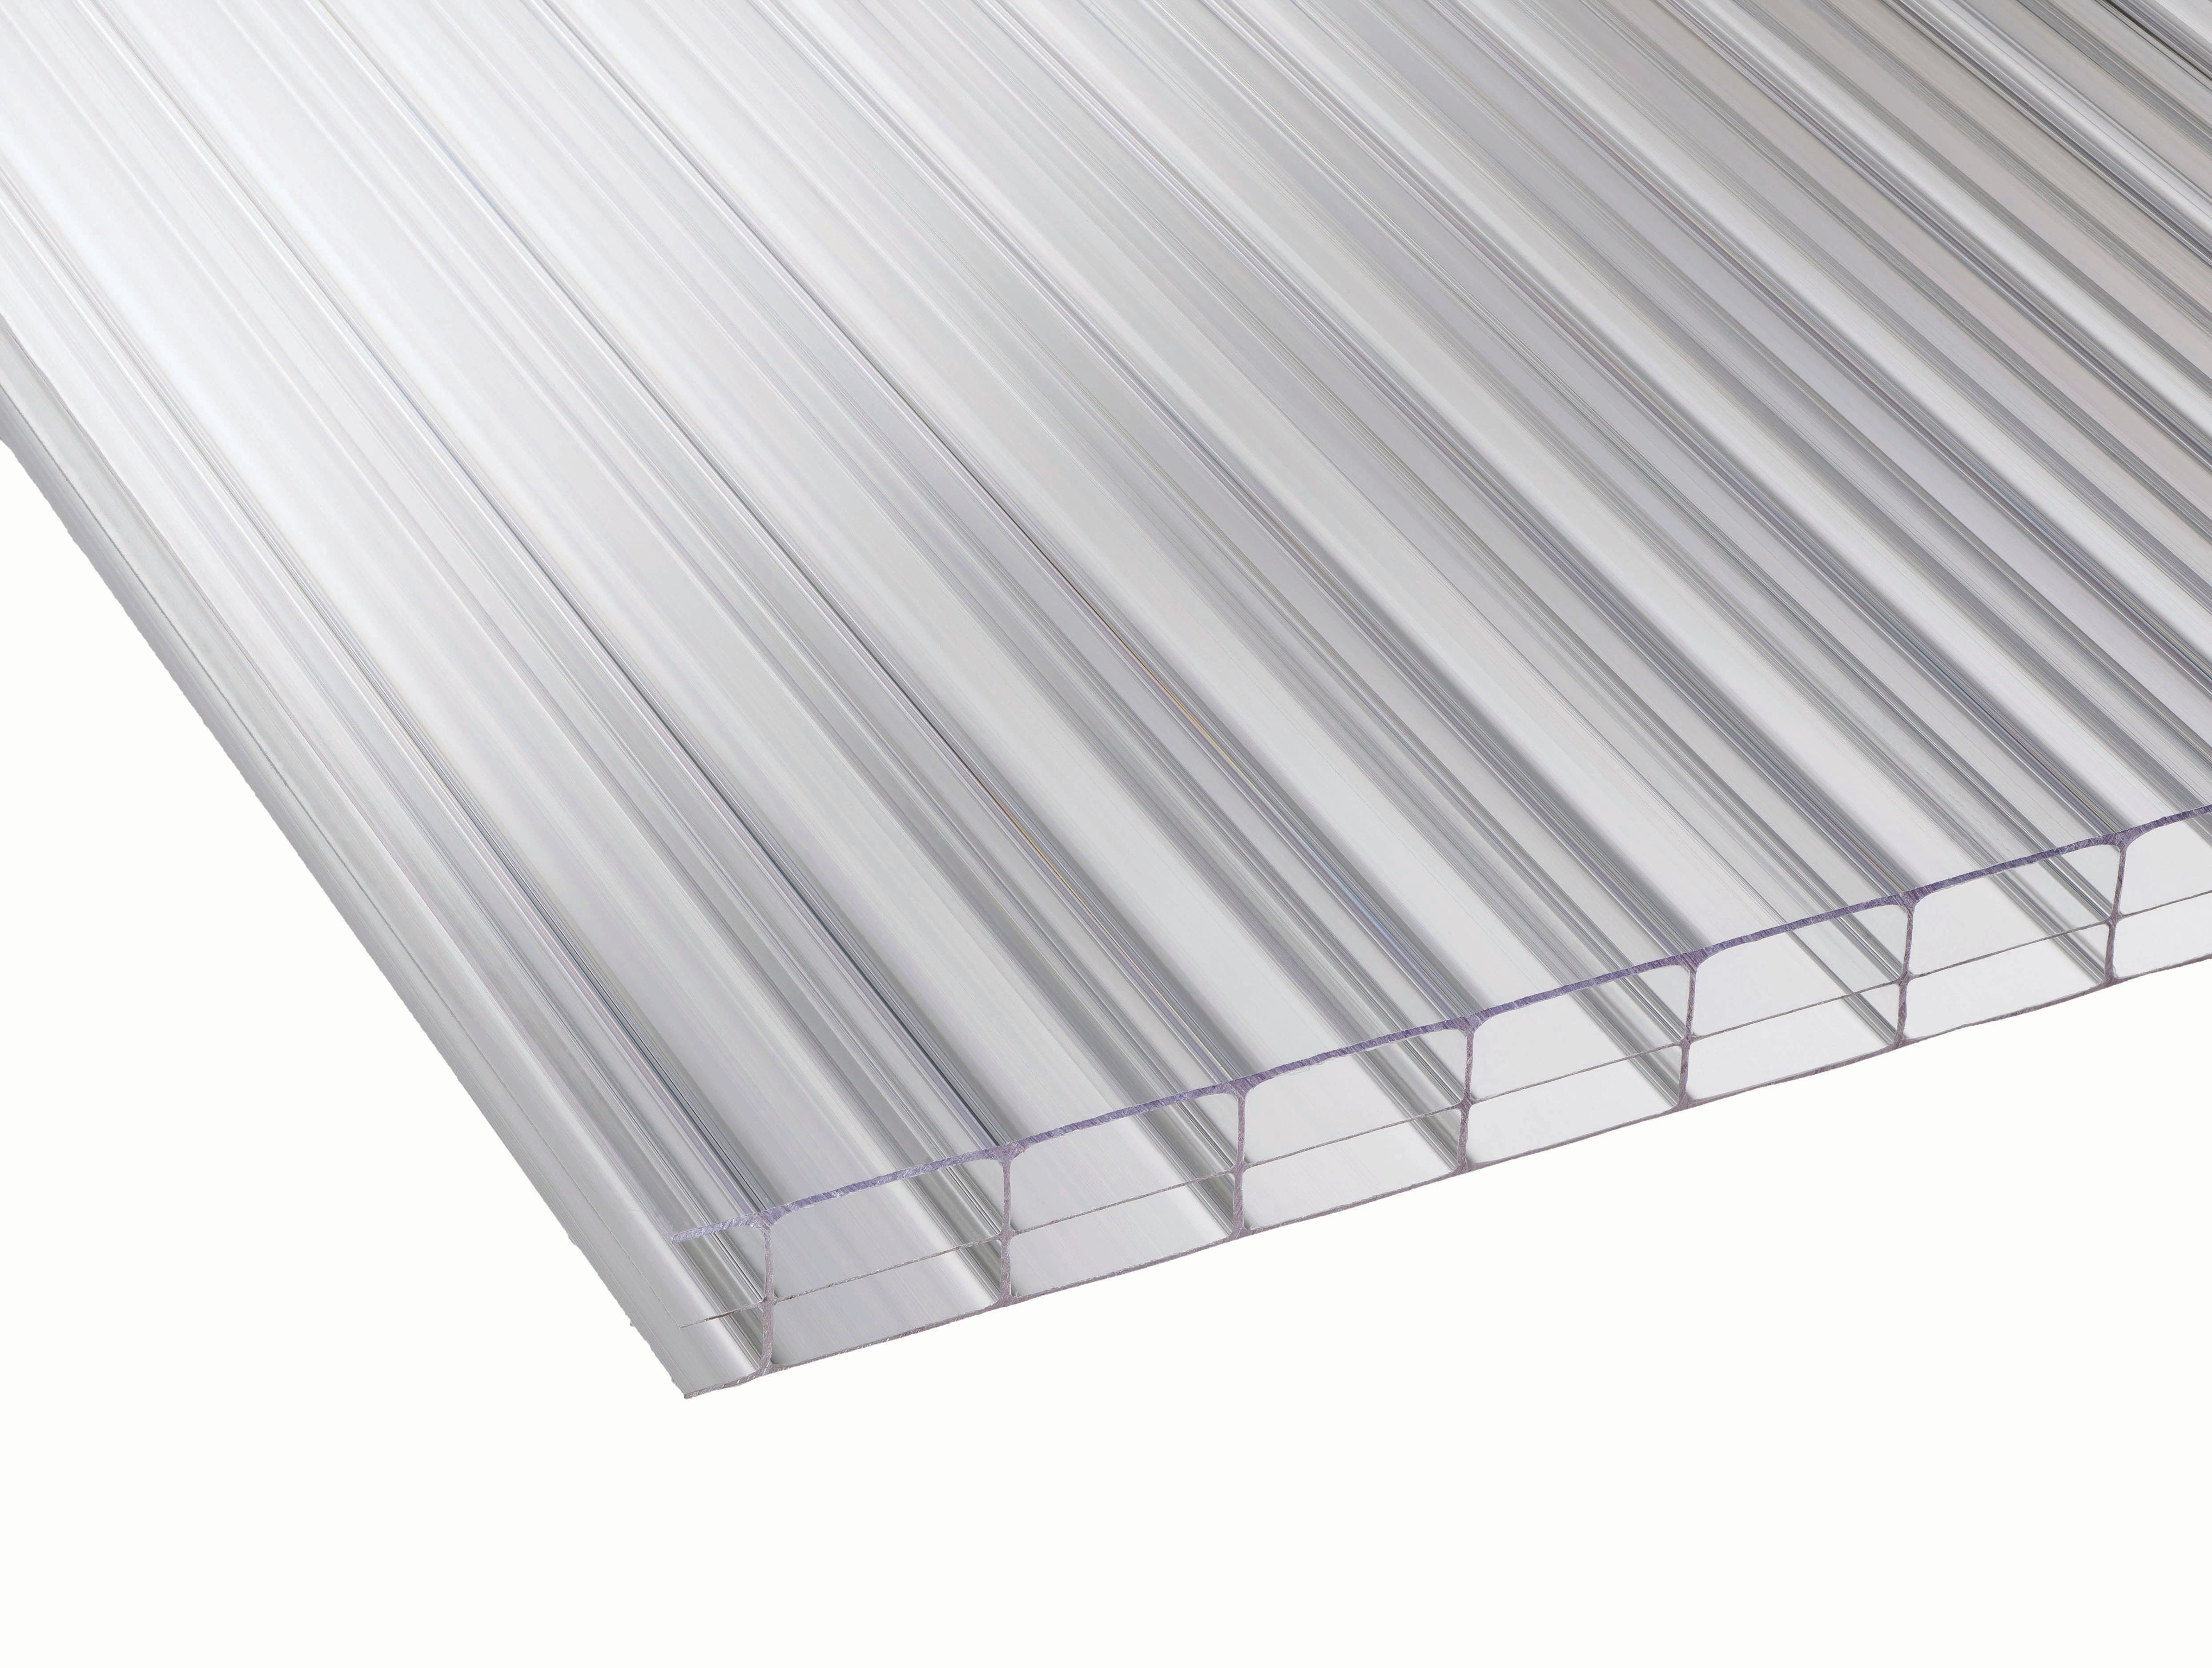 Image of 16mm Clear Multiwall Polycarbonate Sheet - 2500 x 900mm